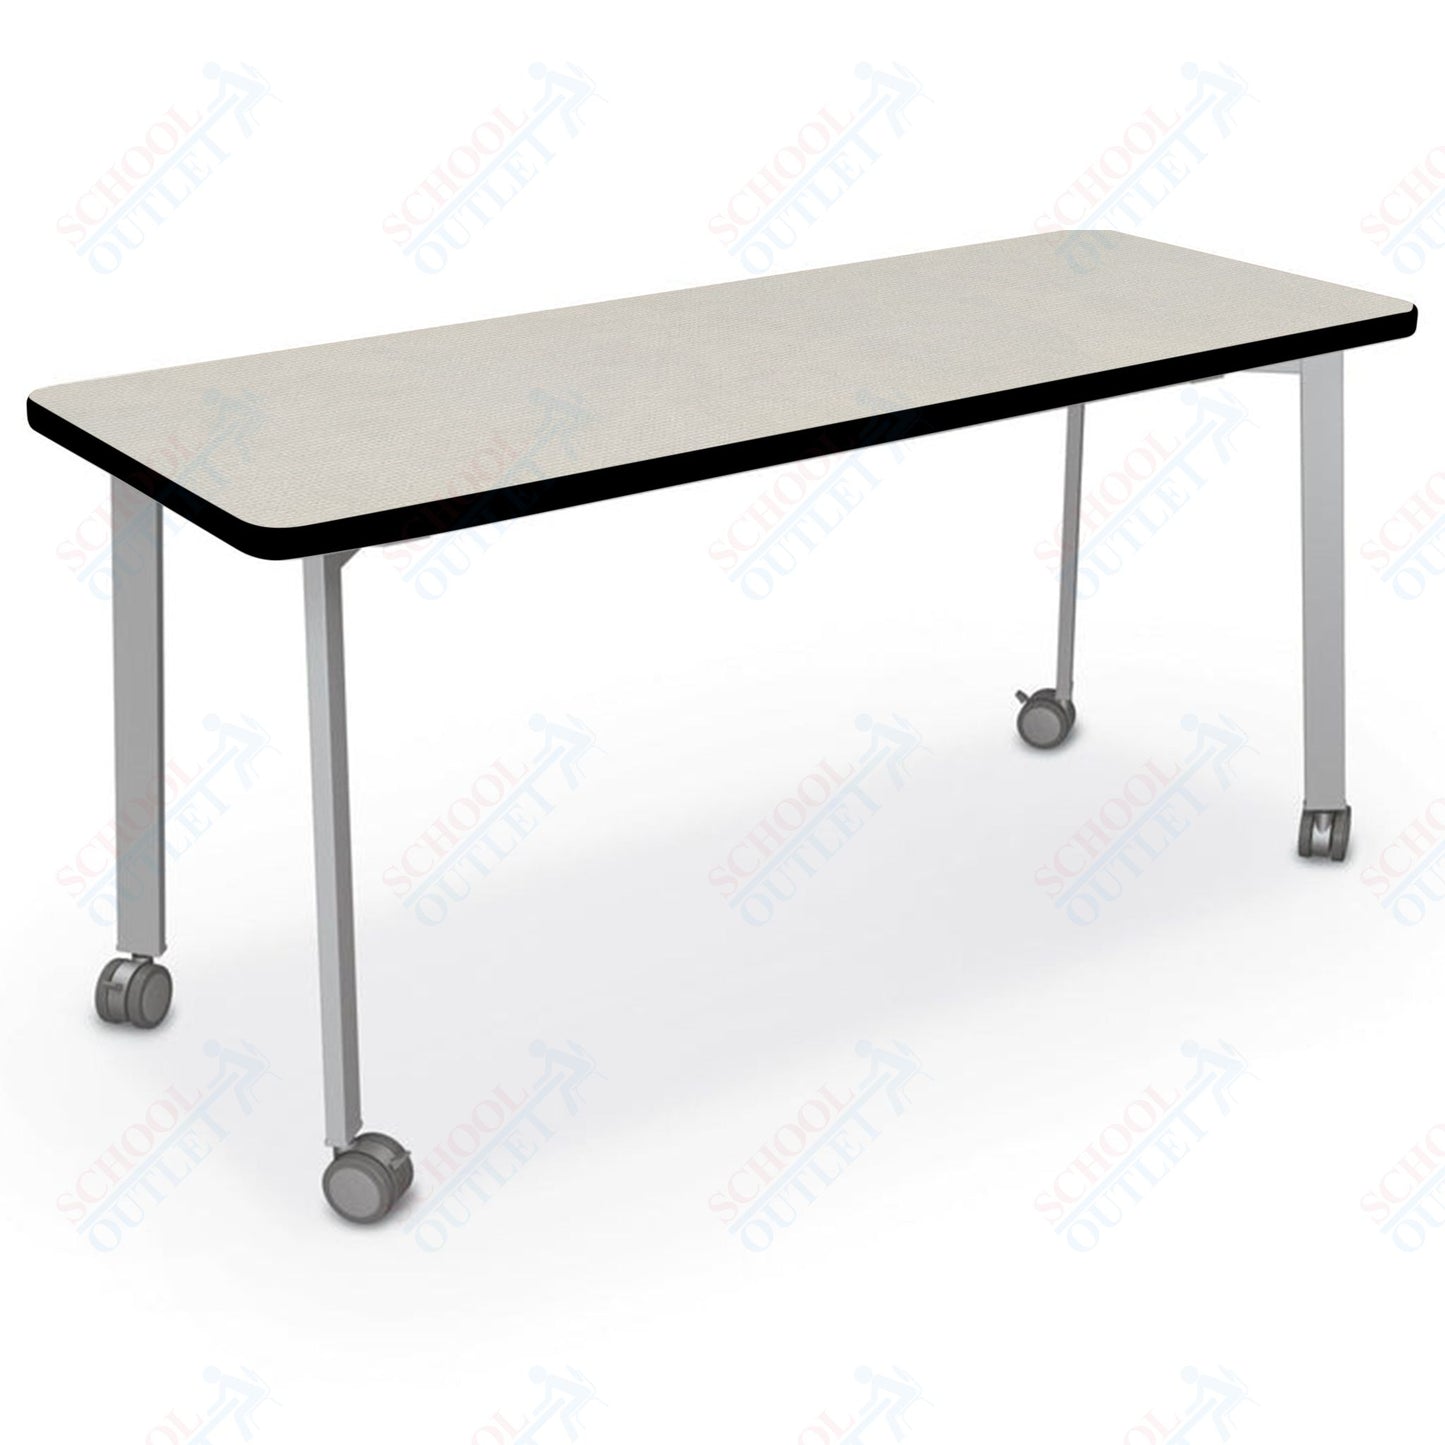 Mooreco Akt Table – 24"D x 60"W Rectangle, Laminate or Butcher Block Top , Fixed Height Available in 29"H, 36"H, or 42"H